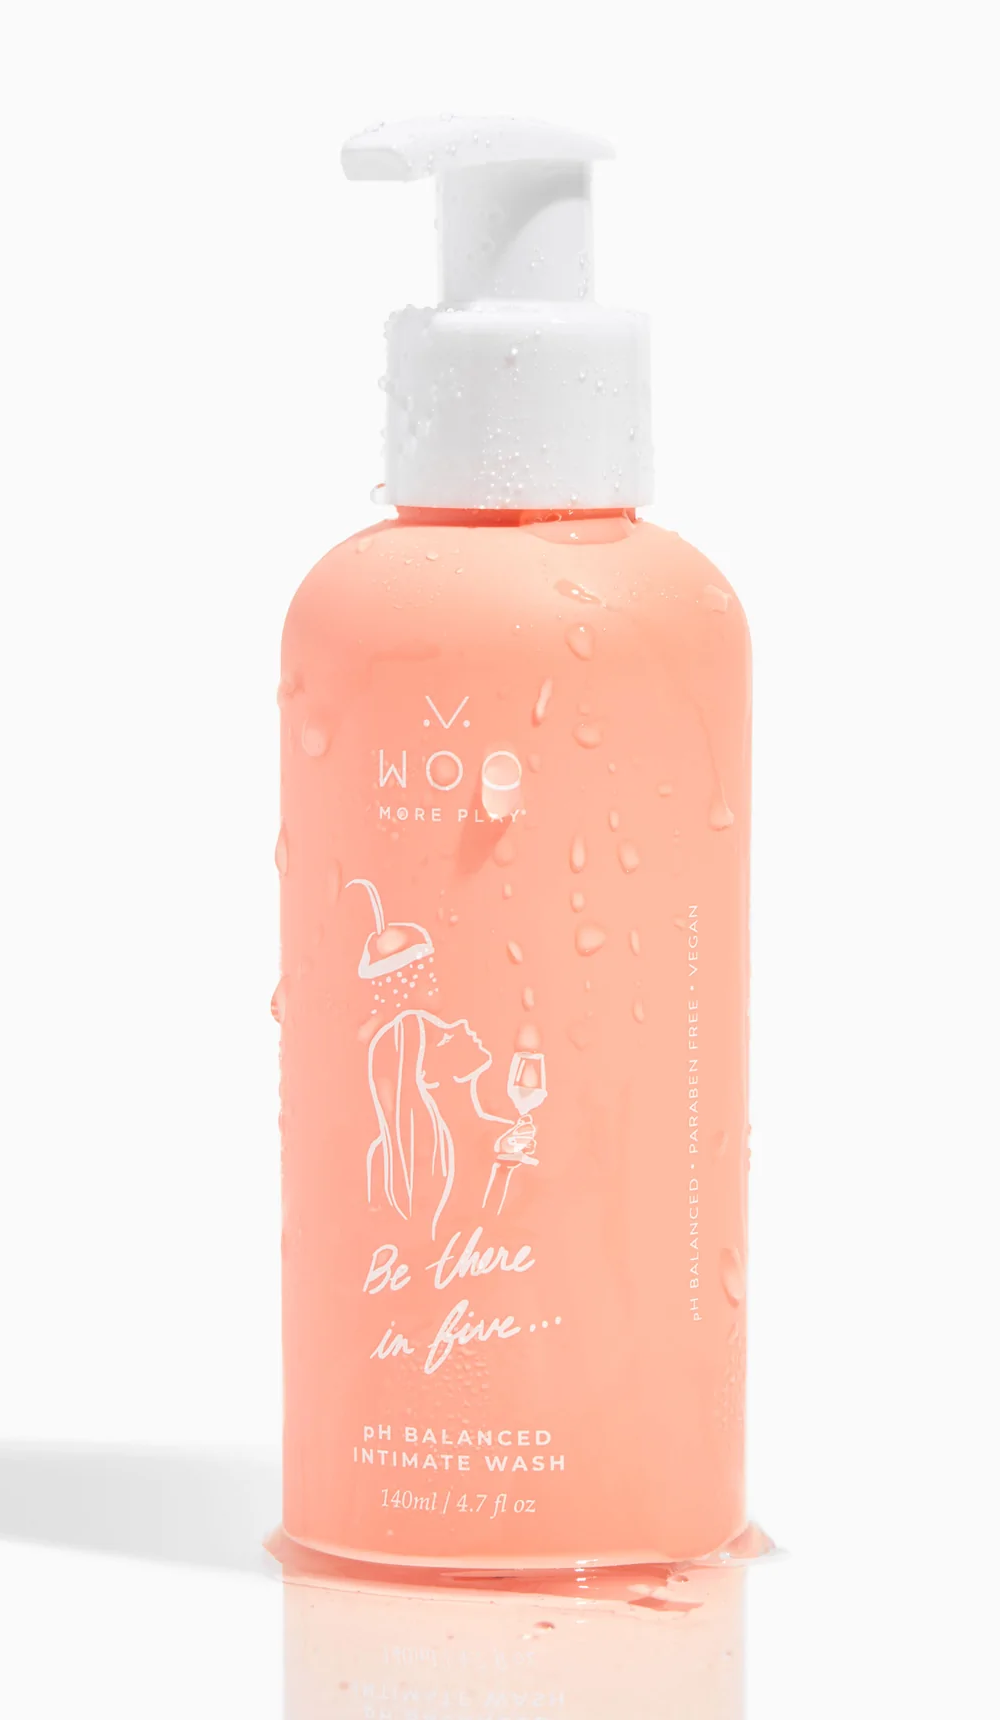 WOO MORE PLAY BE THERE IN FIVE pH BALANCED INTIMATE WASH  4.7oz / 140ml alt